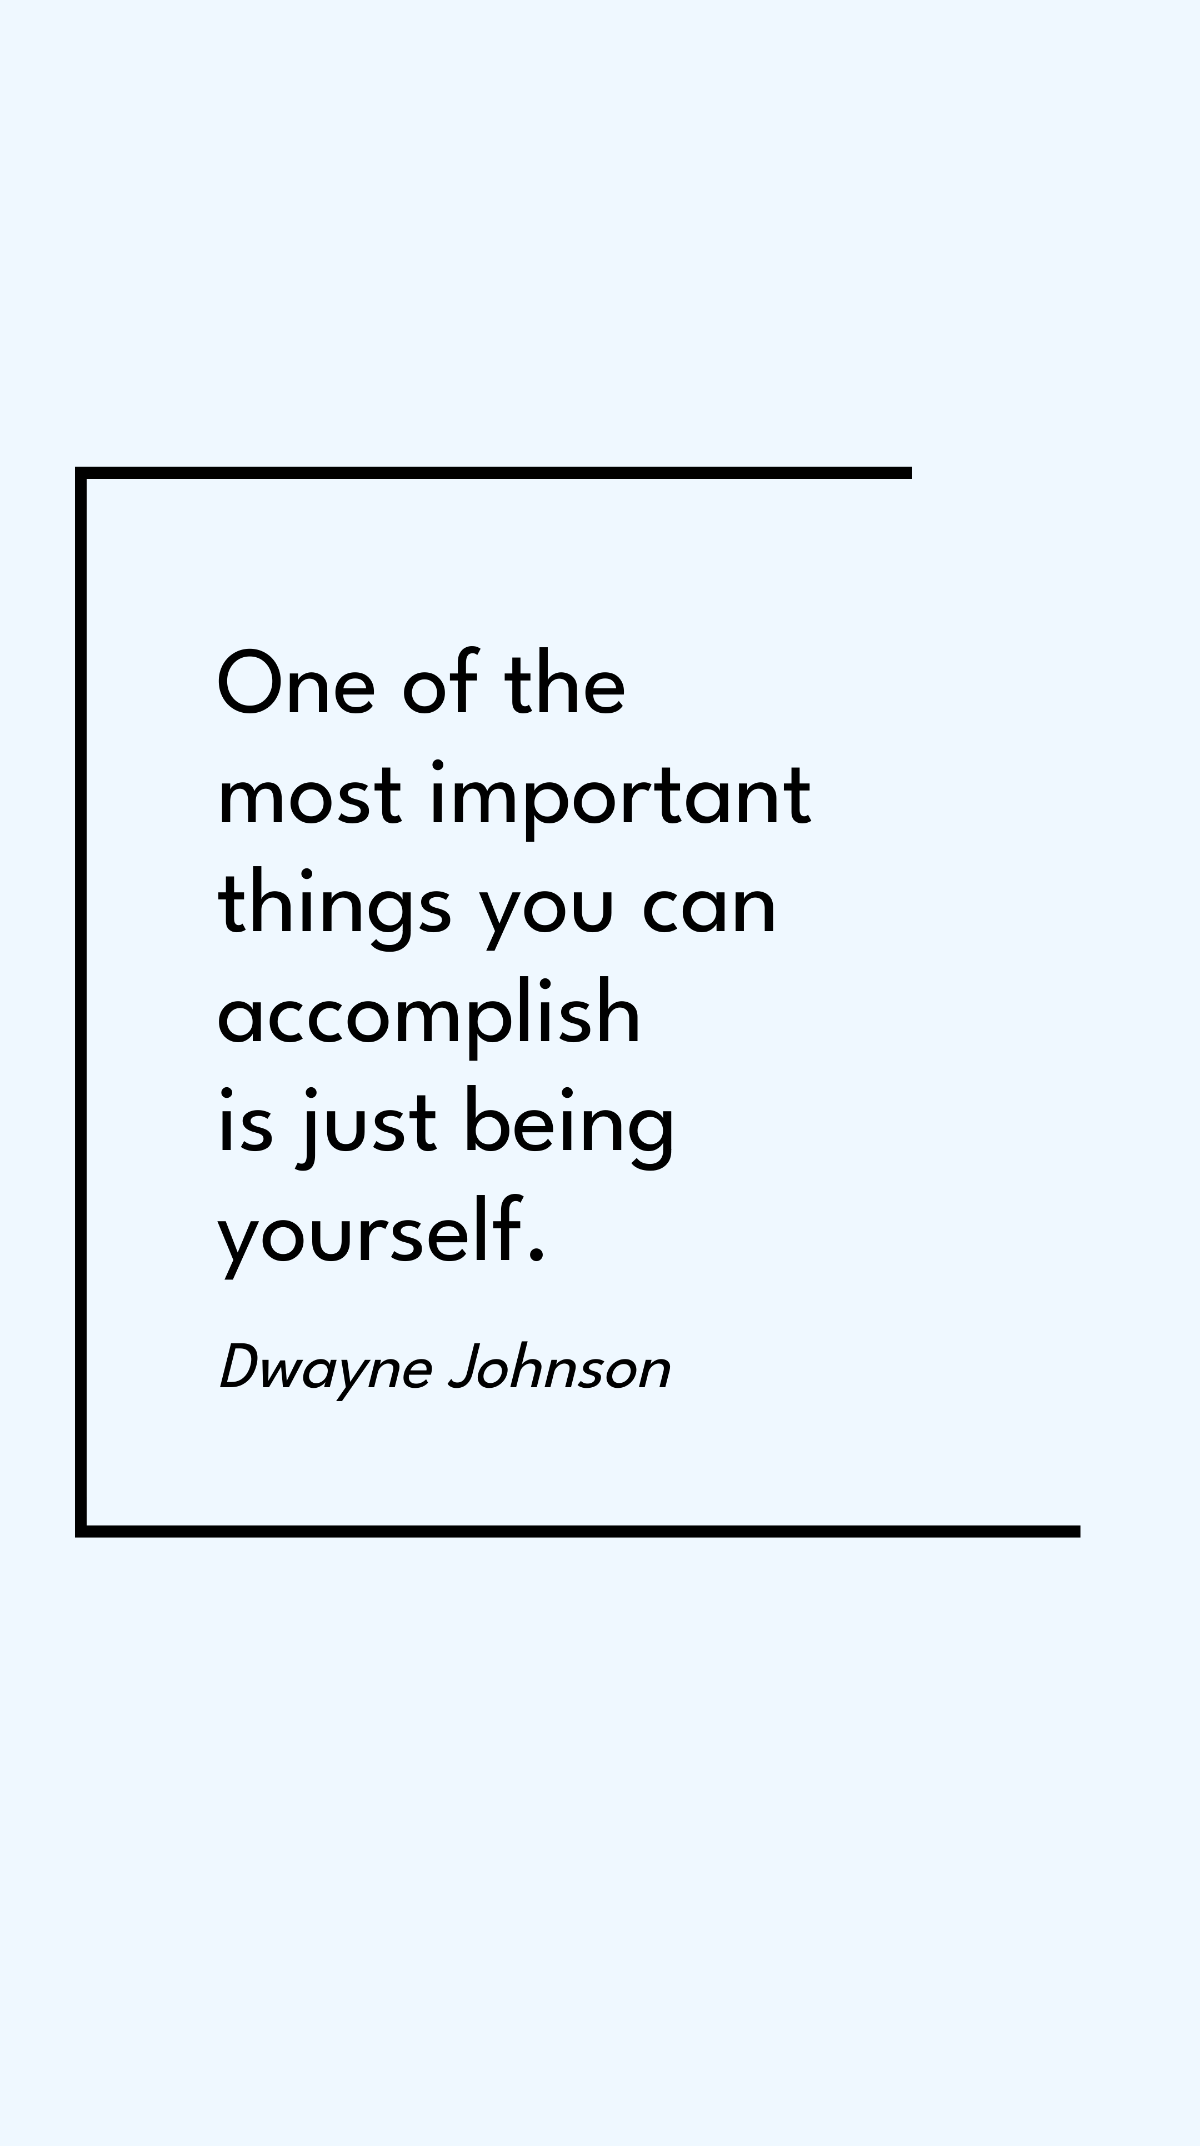 Dwayne "The Rock" Johnson - One of the most important things you can accomplish is just being yourself.